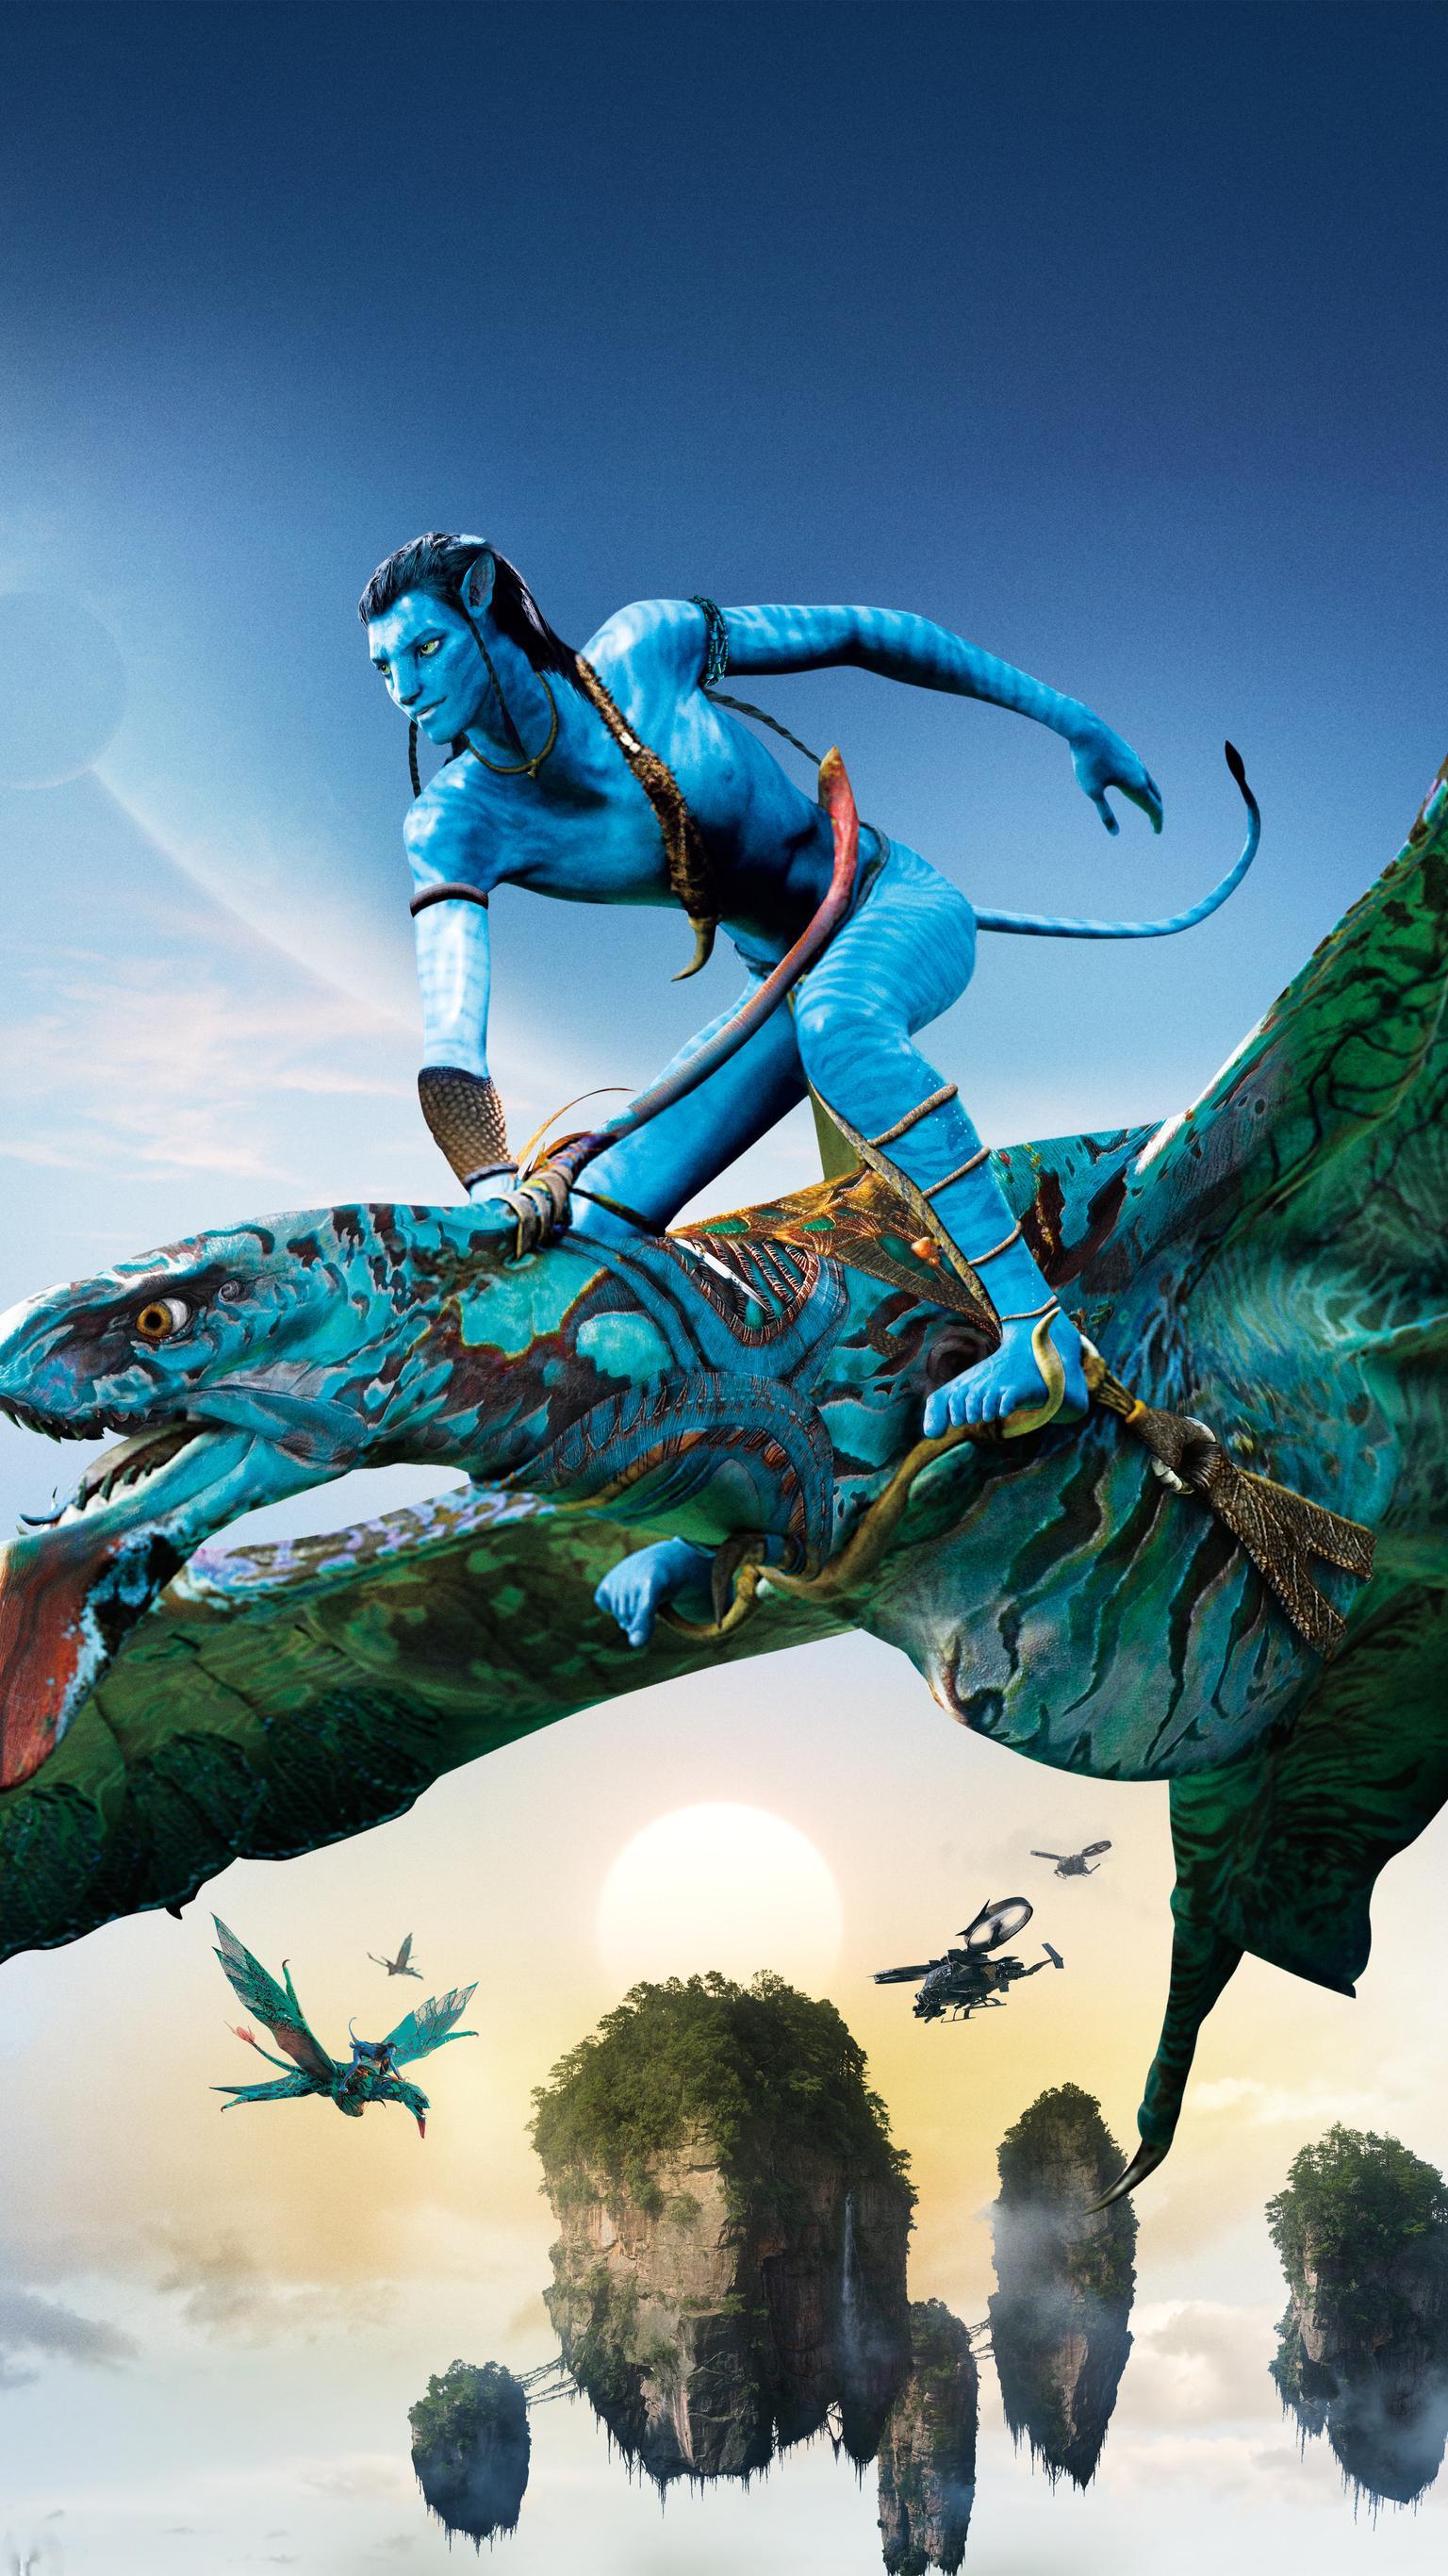 Wallpaper ID 381234  Movie Avatar The Way of Water Phone Wallpaper   1080x1920 free download